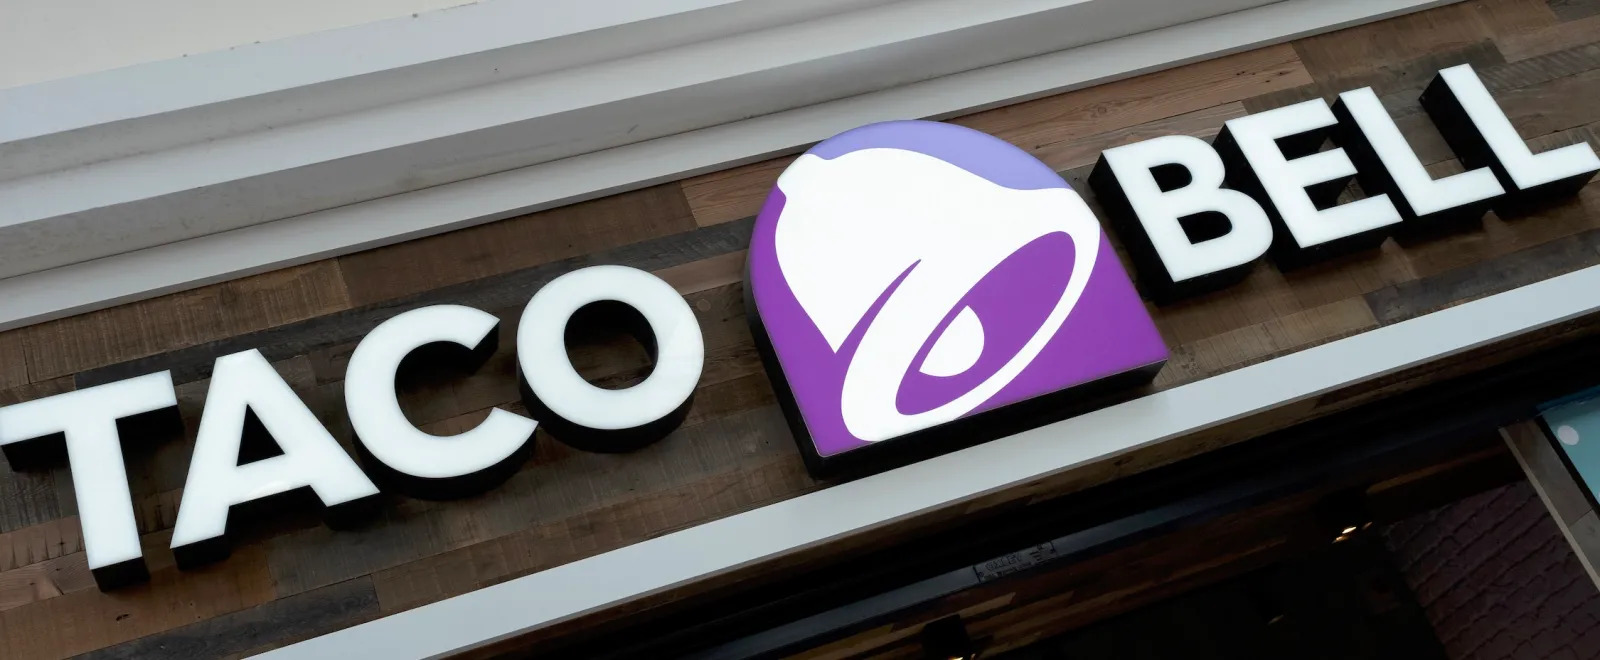 Former Staff Sues Taco Bell Over Christmas Party Orgy